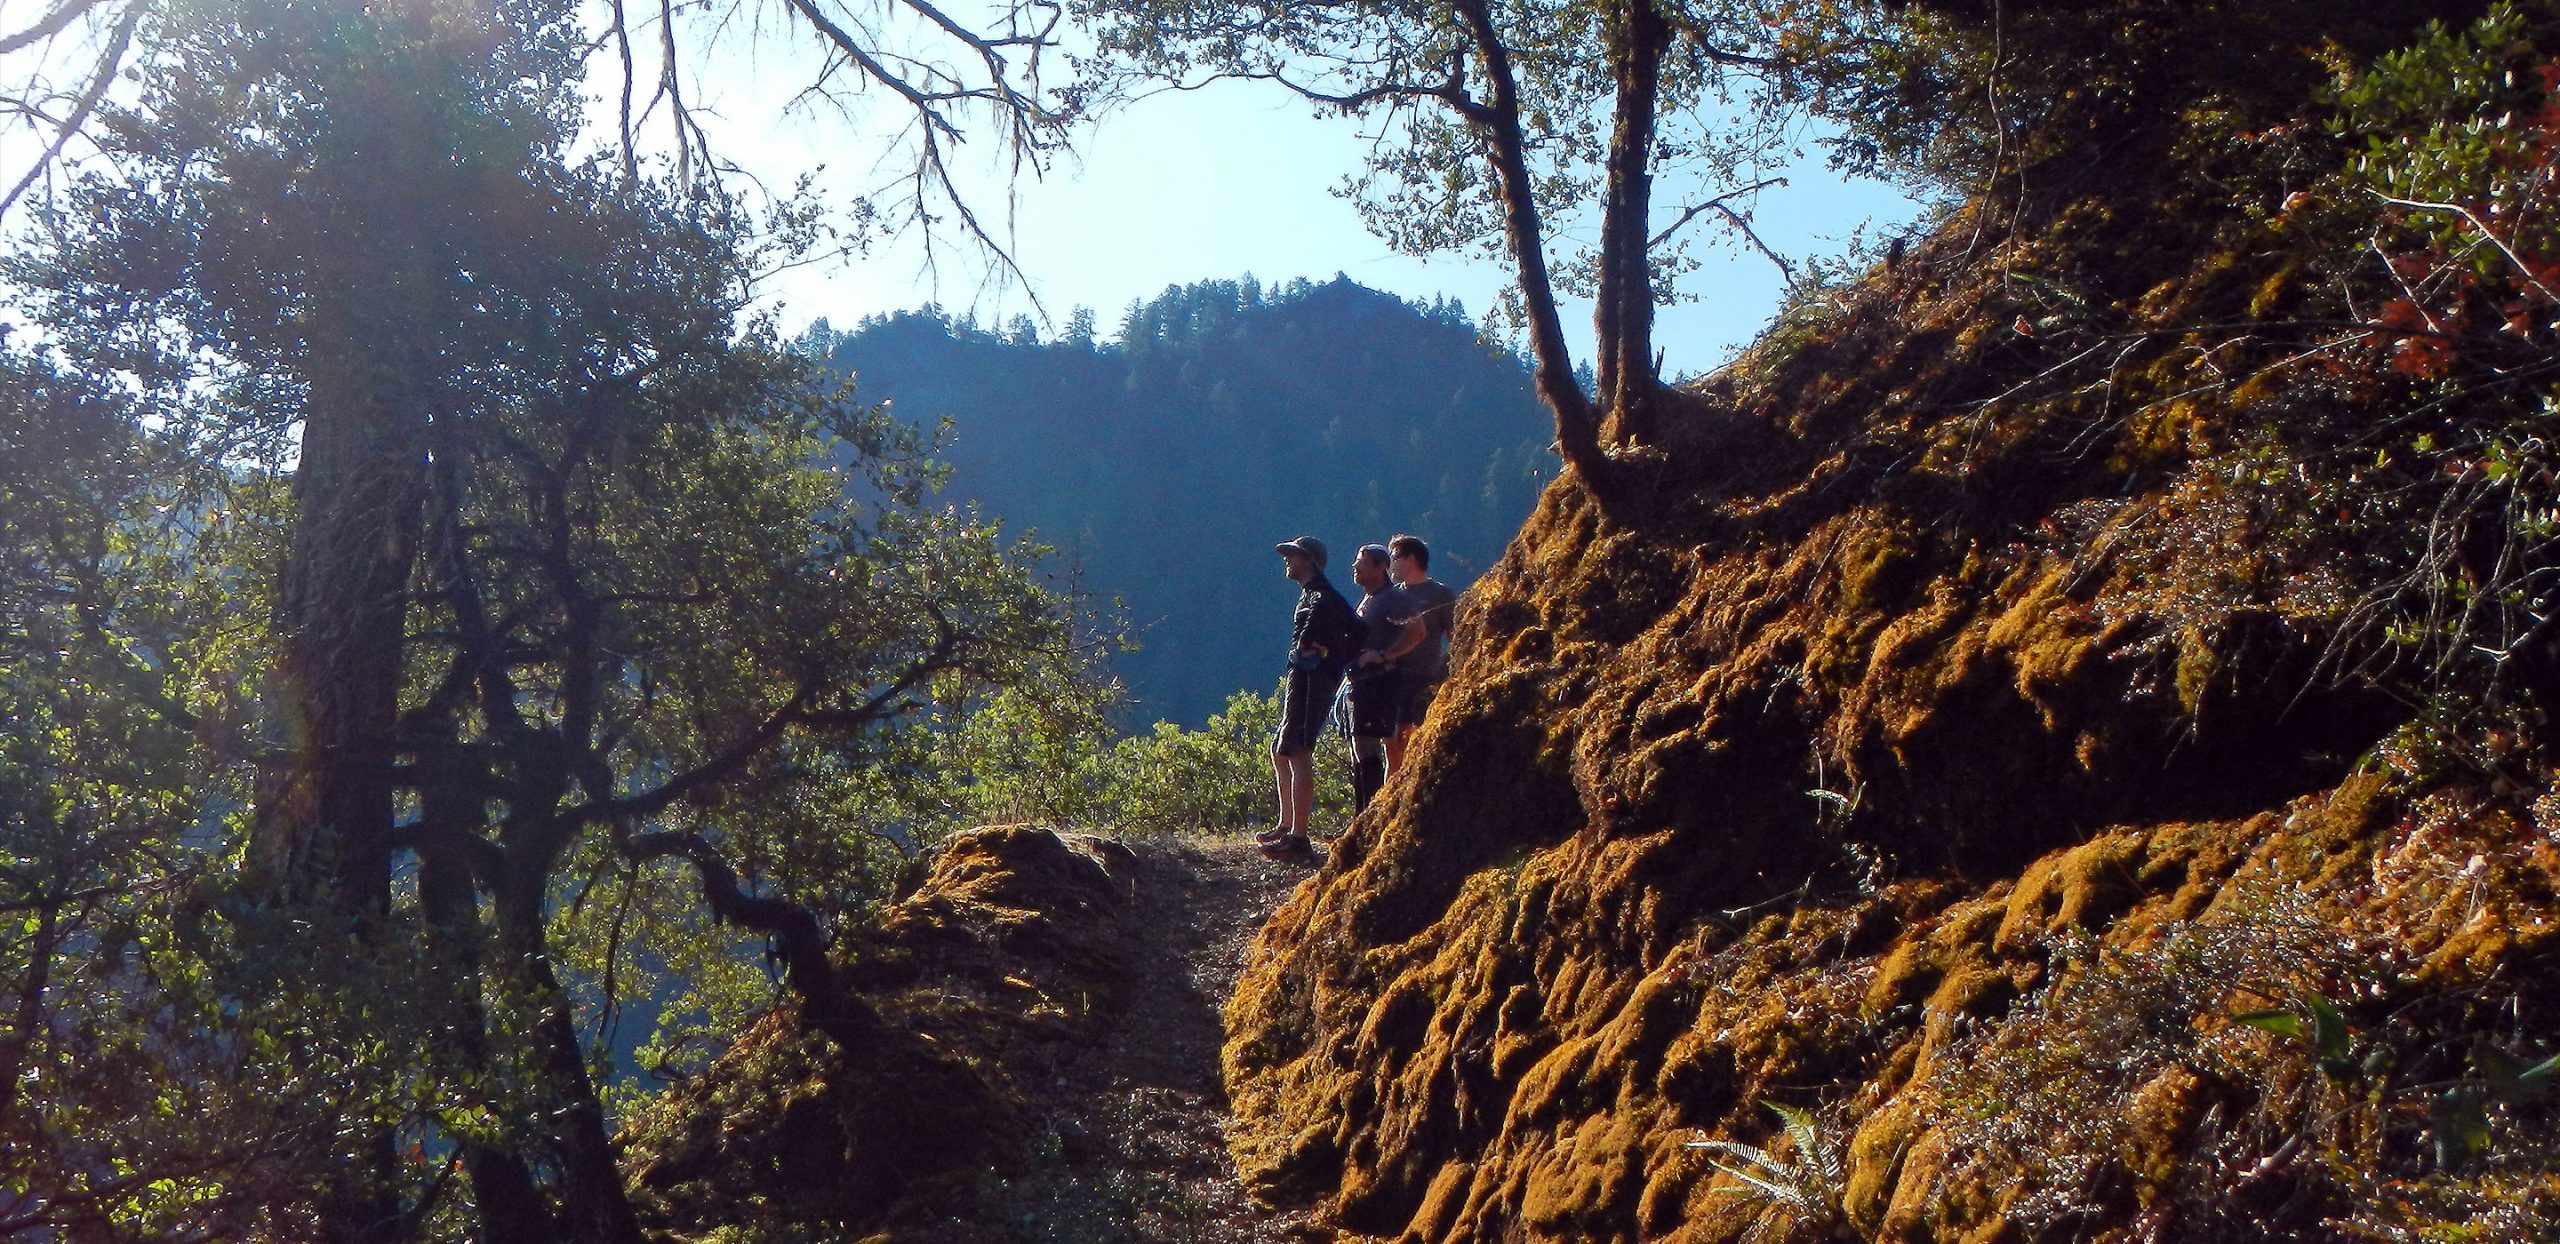 Hiking the Rogue River Trail - A River Guide's Perspective